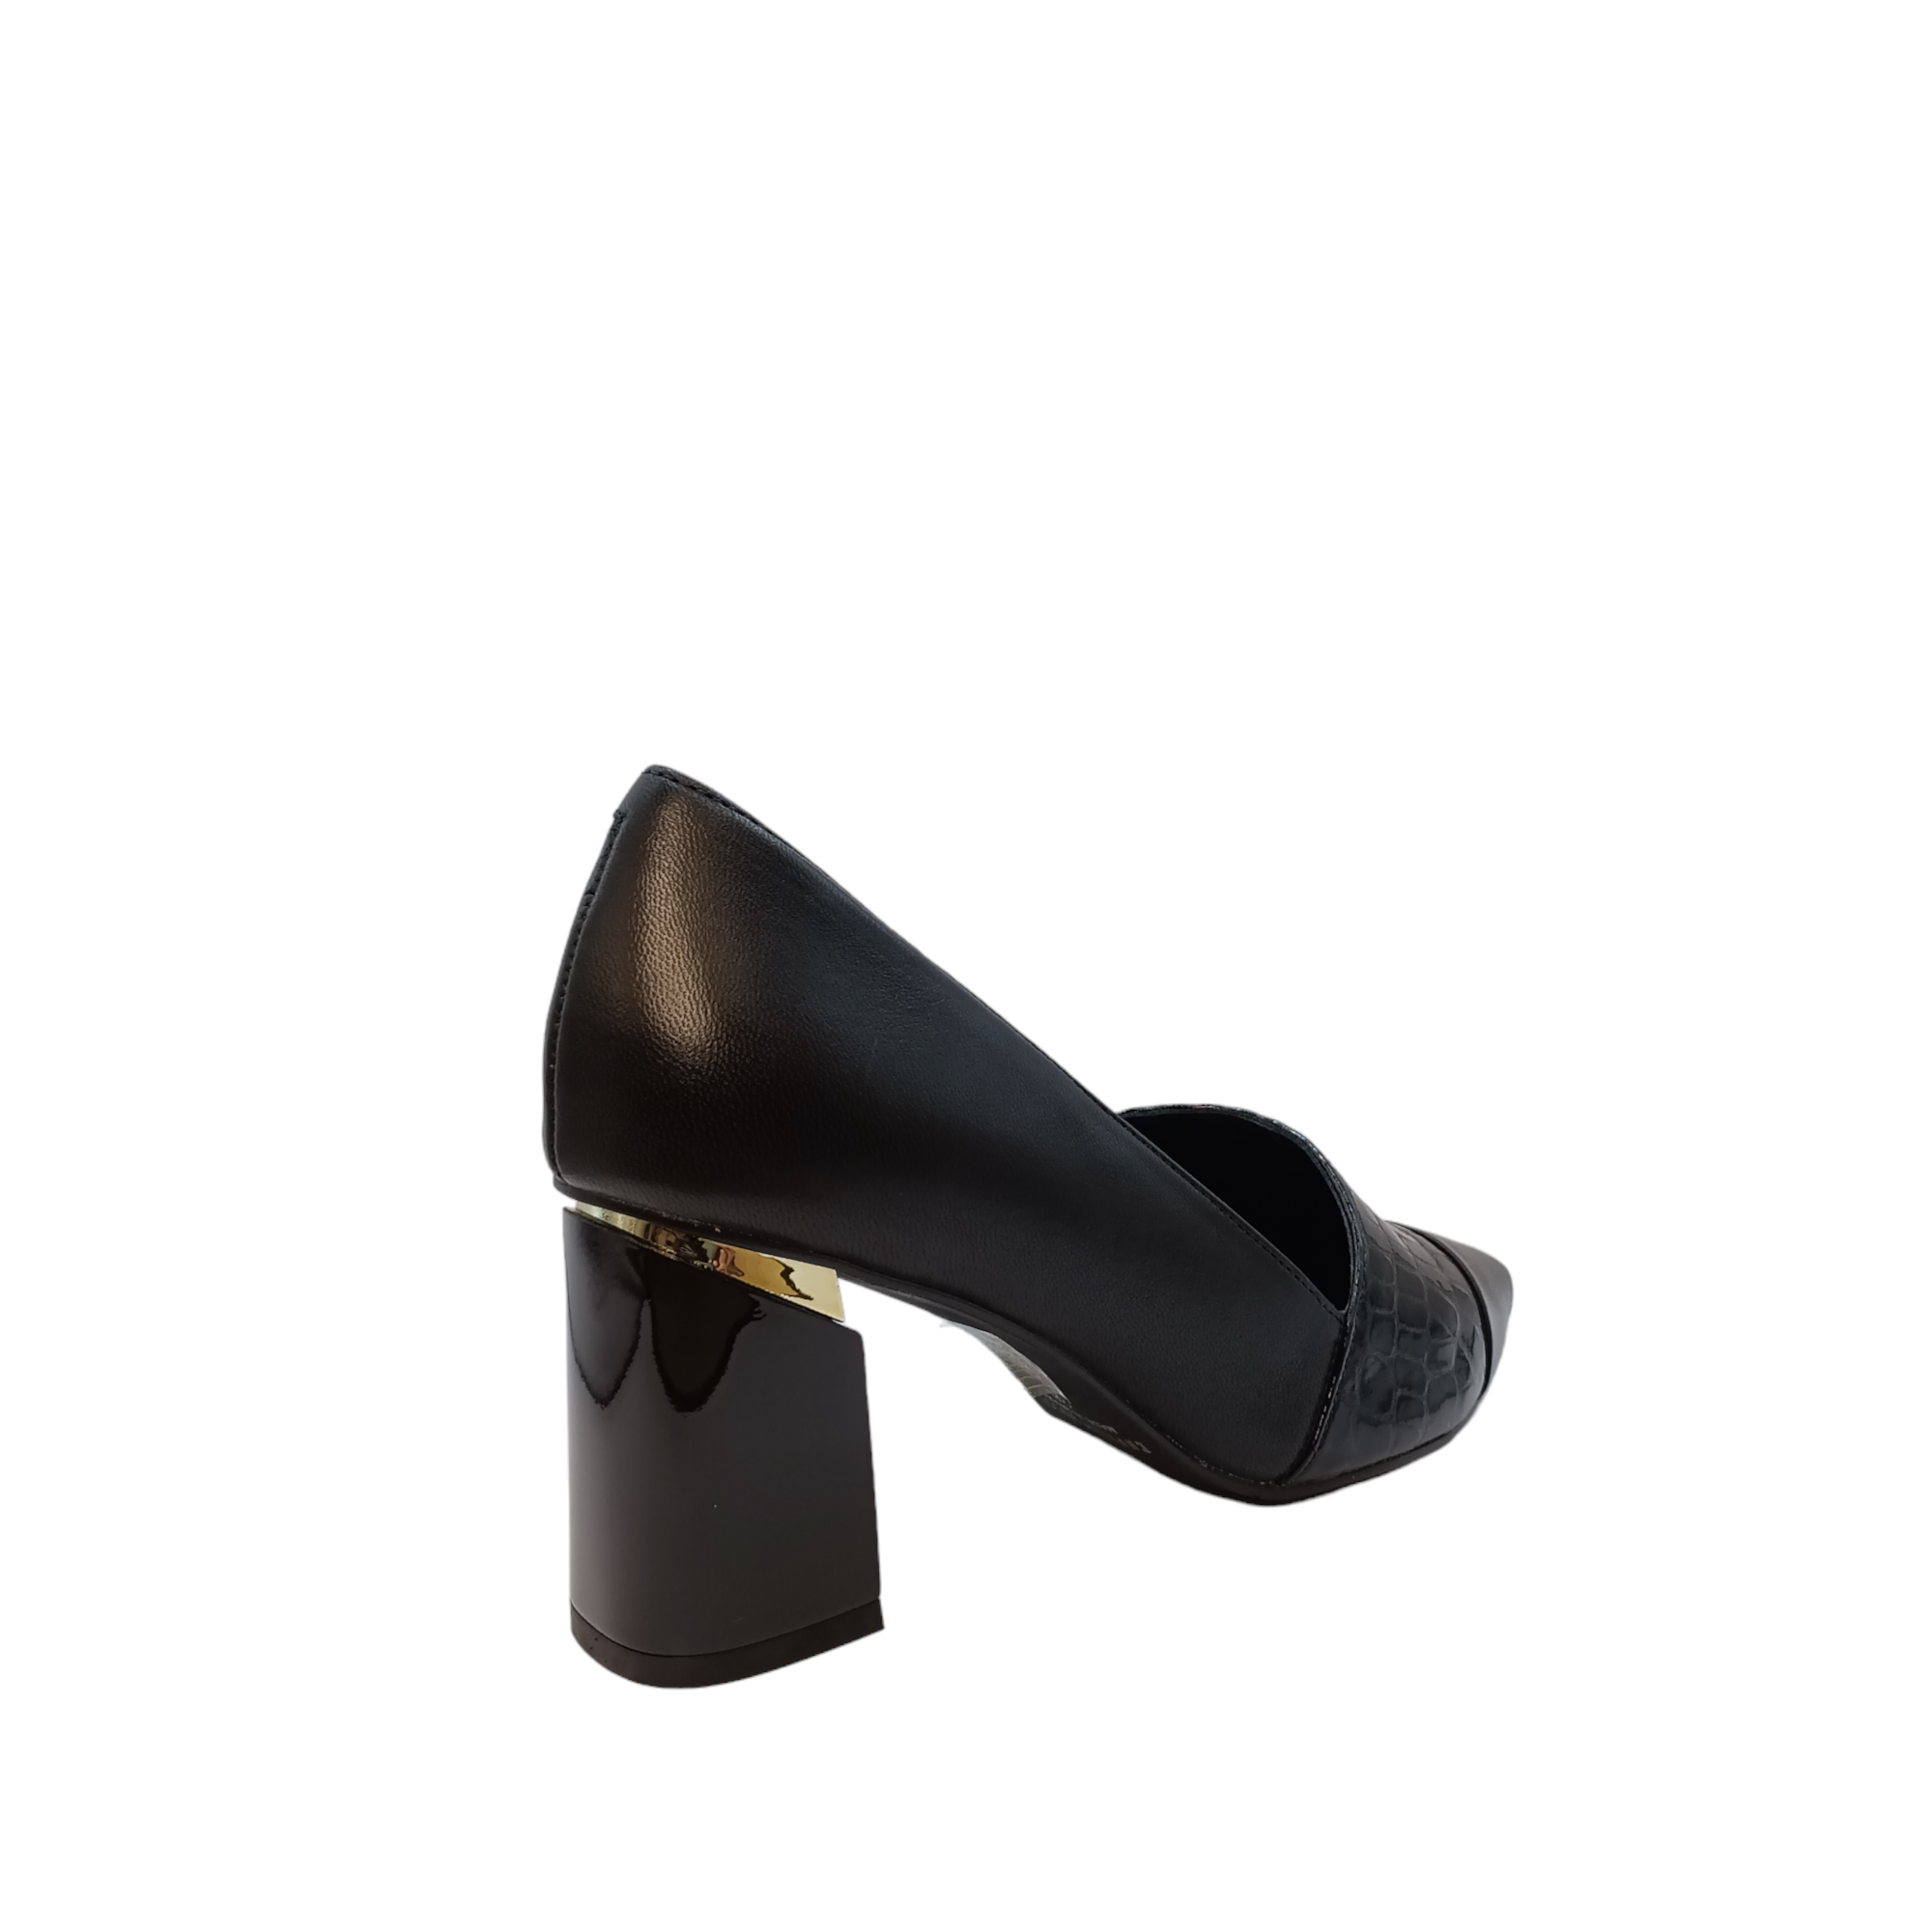 Shop Croft Capelli Rossi - with shoe&amp;me - from Capelli Rossi - Heels - Heel, Summer, Winter, Womens - [collection]